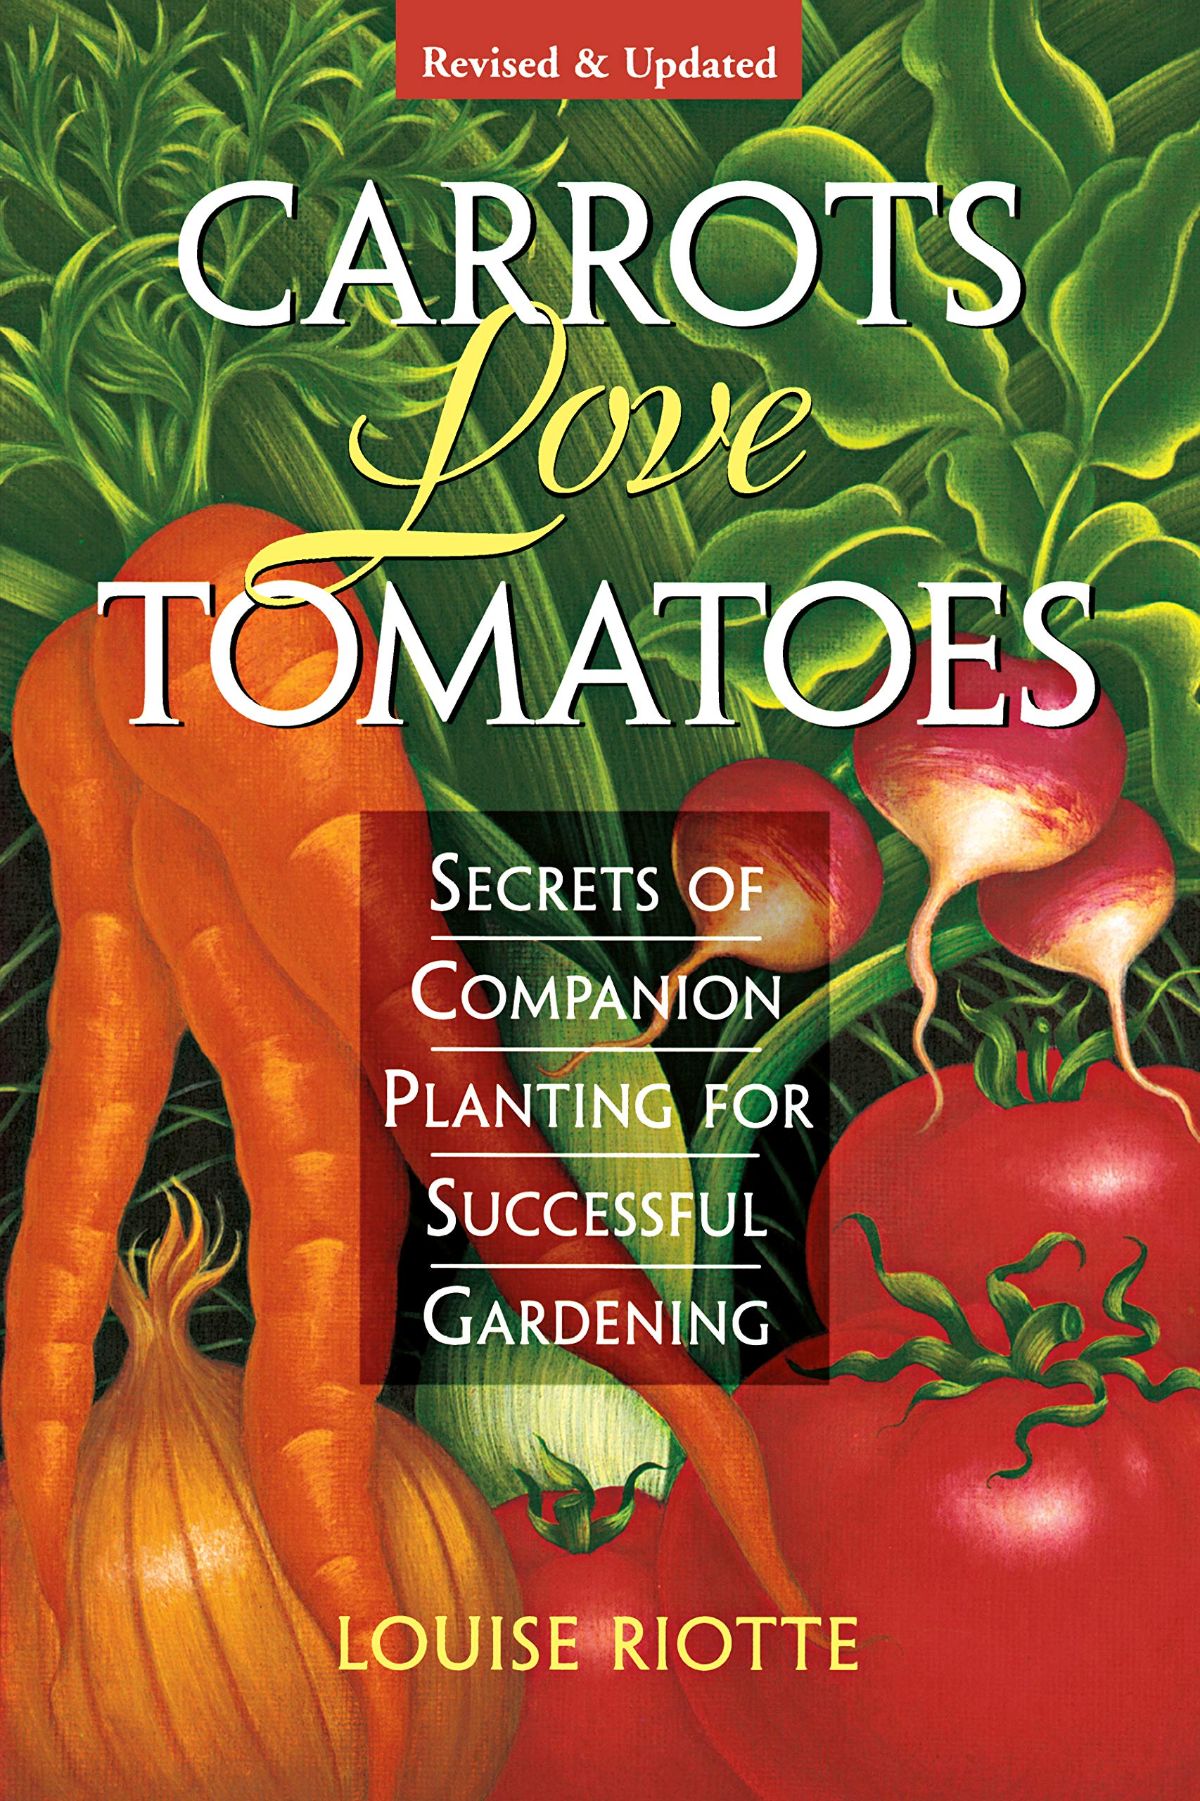 Picture of the cover of the book Carrots Love Tomatoes: Secrets of Companion Planting for Successful Gardening by Louise Riotte